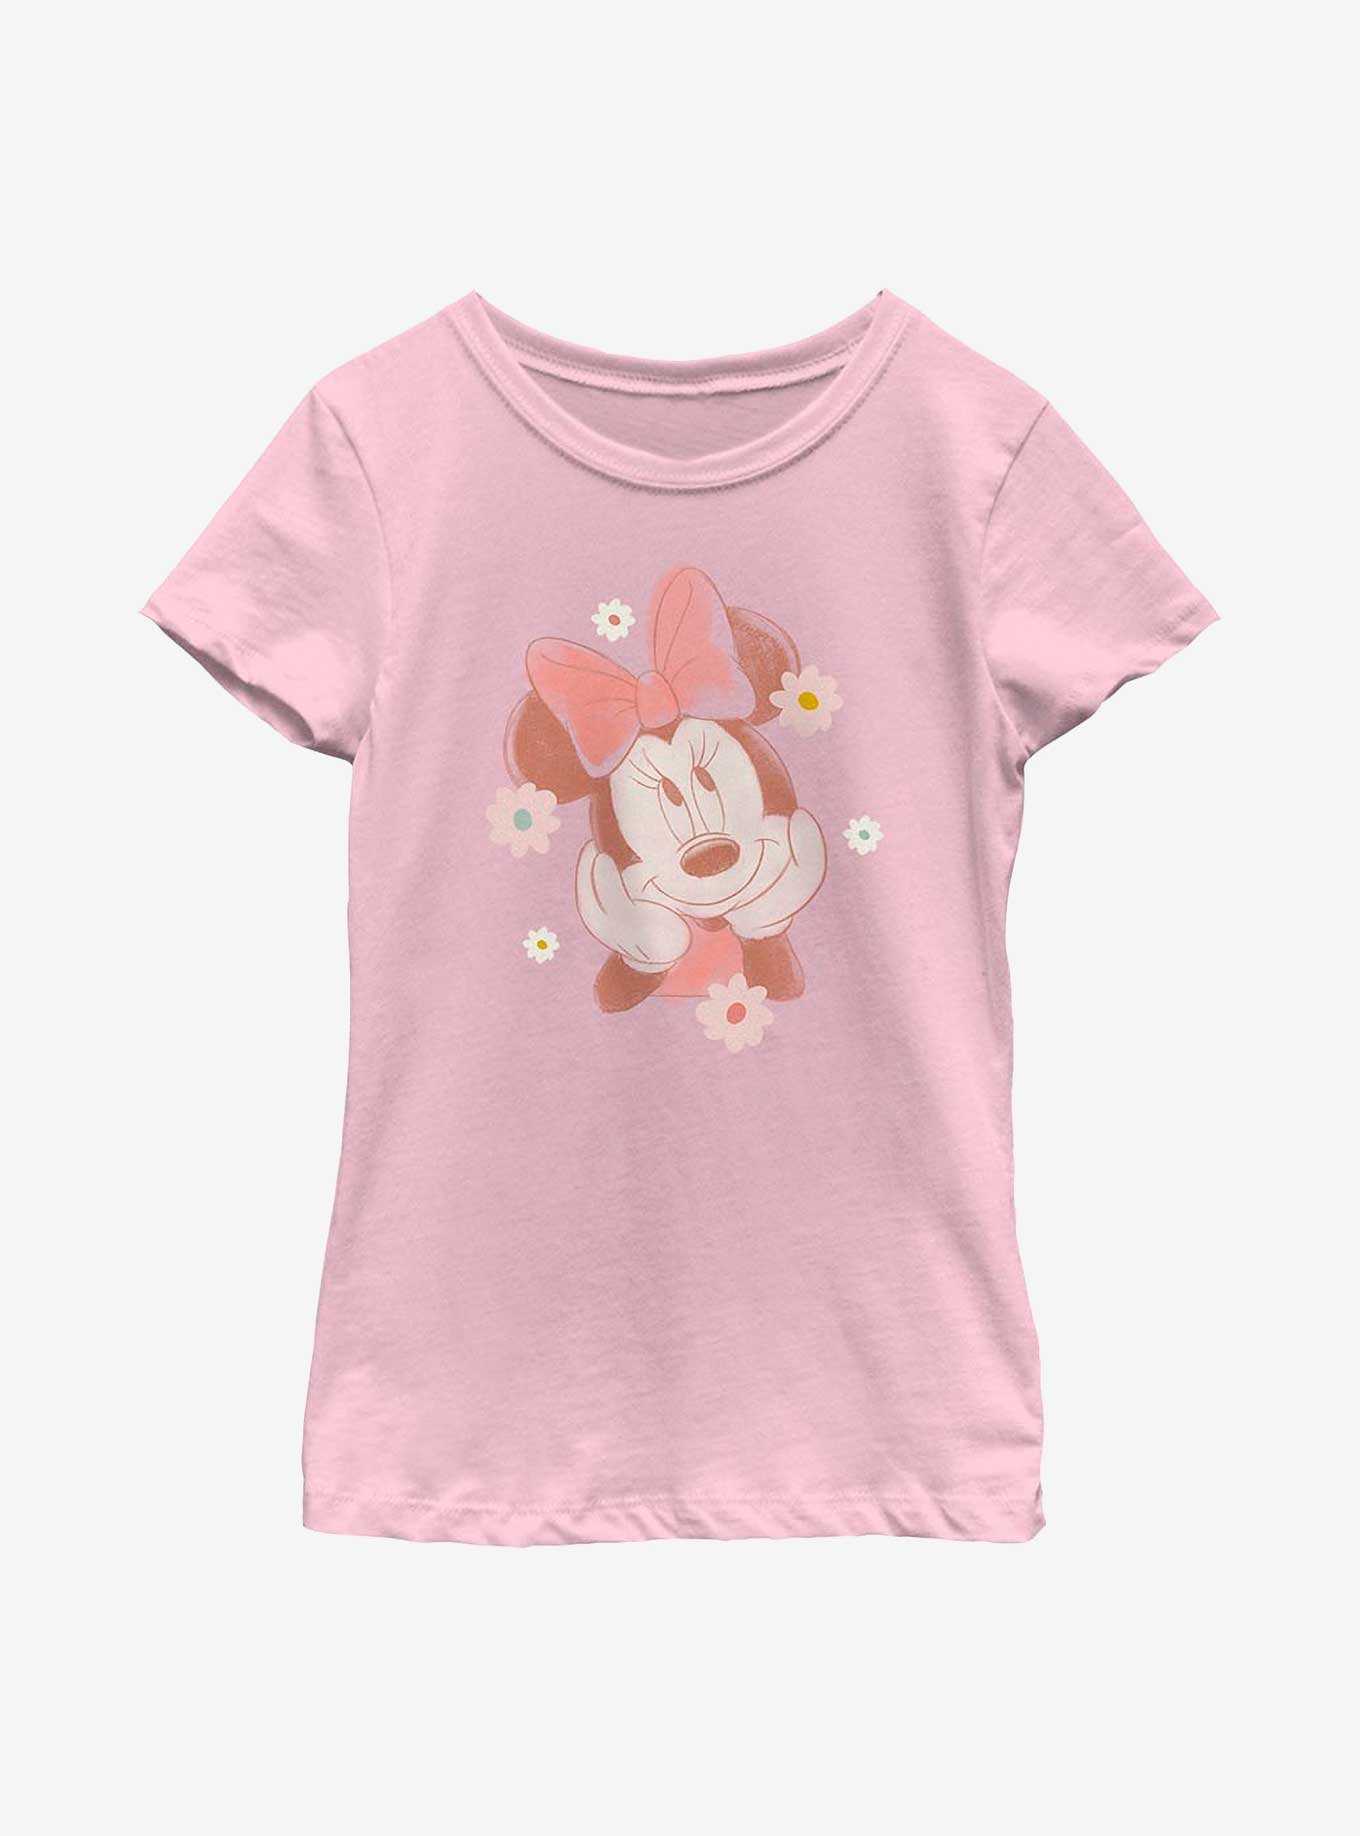 Disney Minnie Mouse Floral Frame Youth Girls T-Shirt, , hi-res